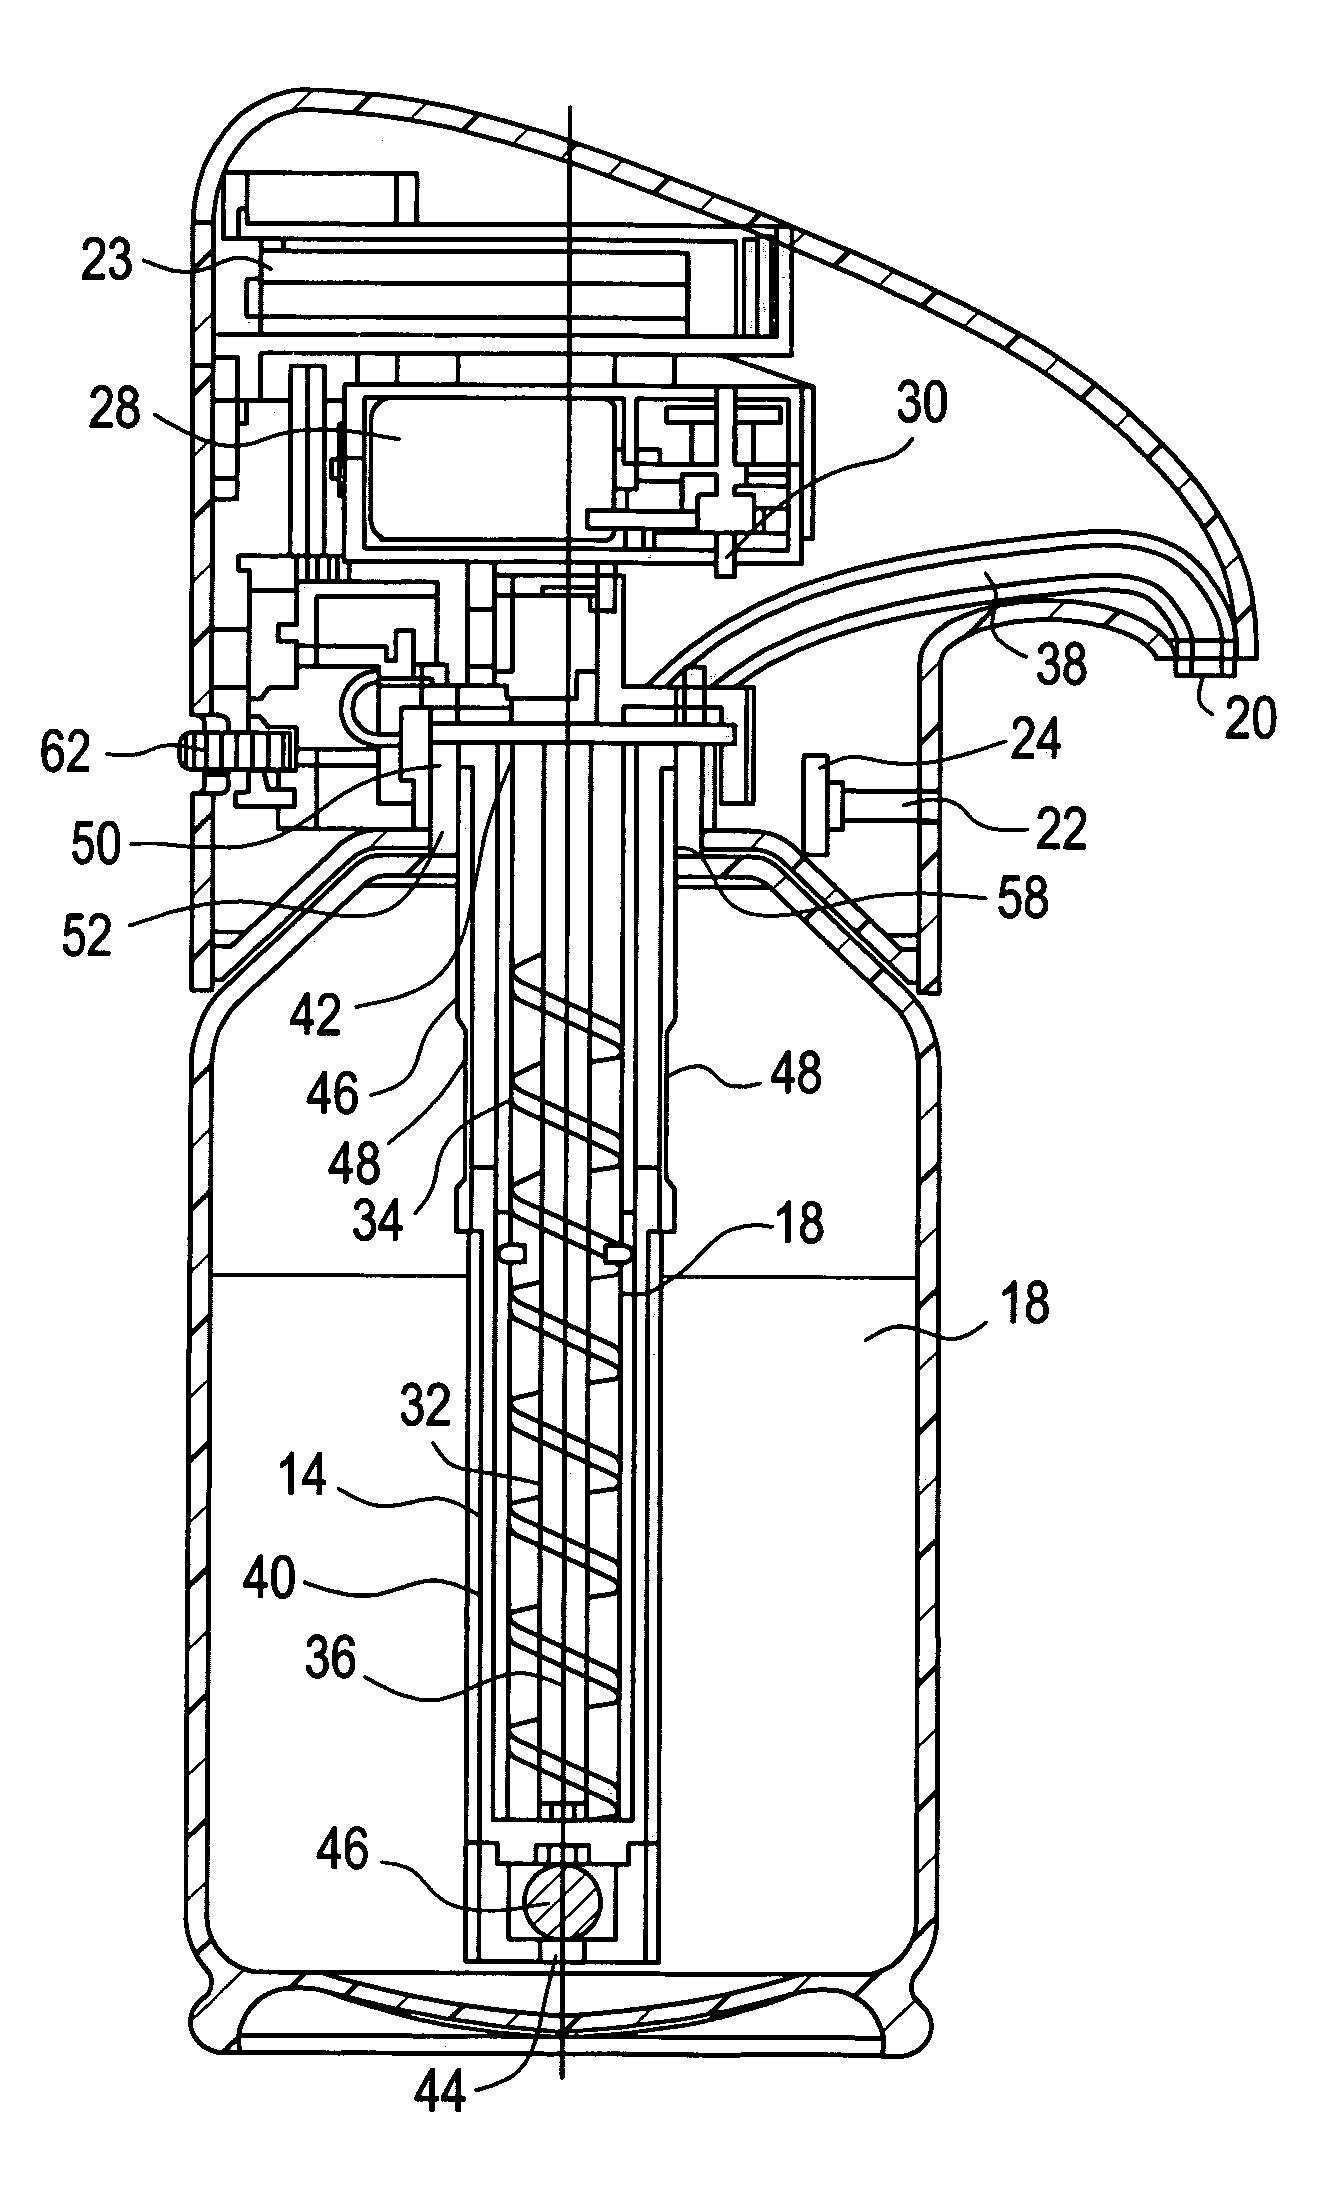 Self-contained, portable and automatic fluid dispenser